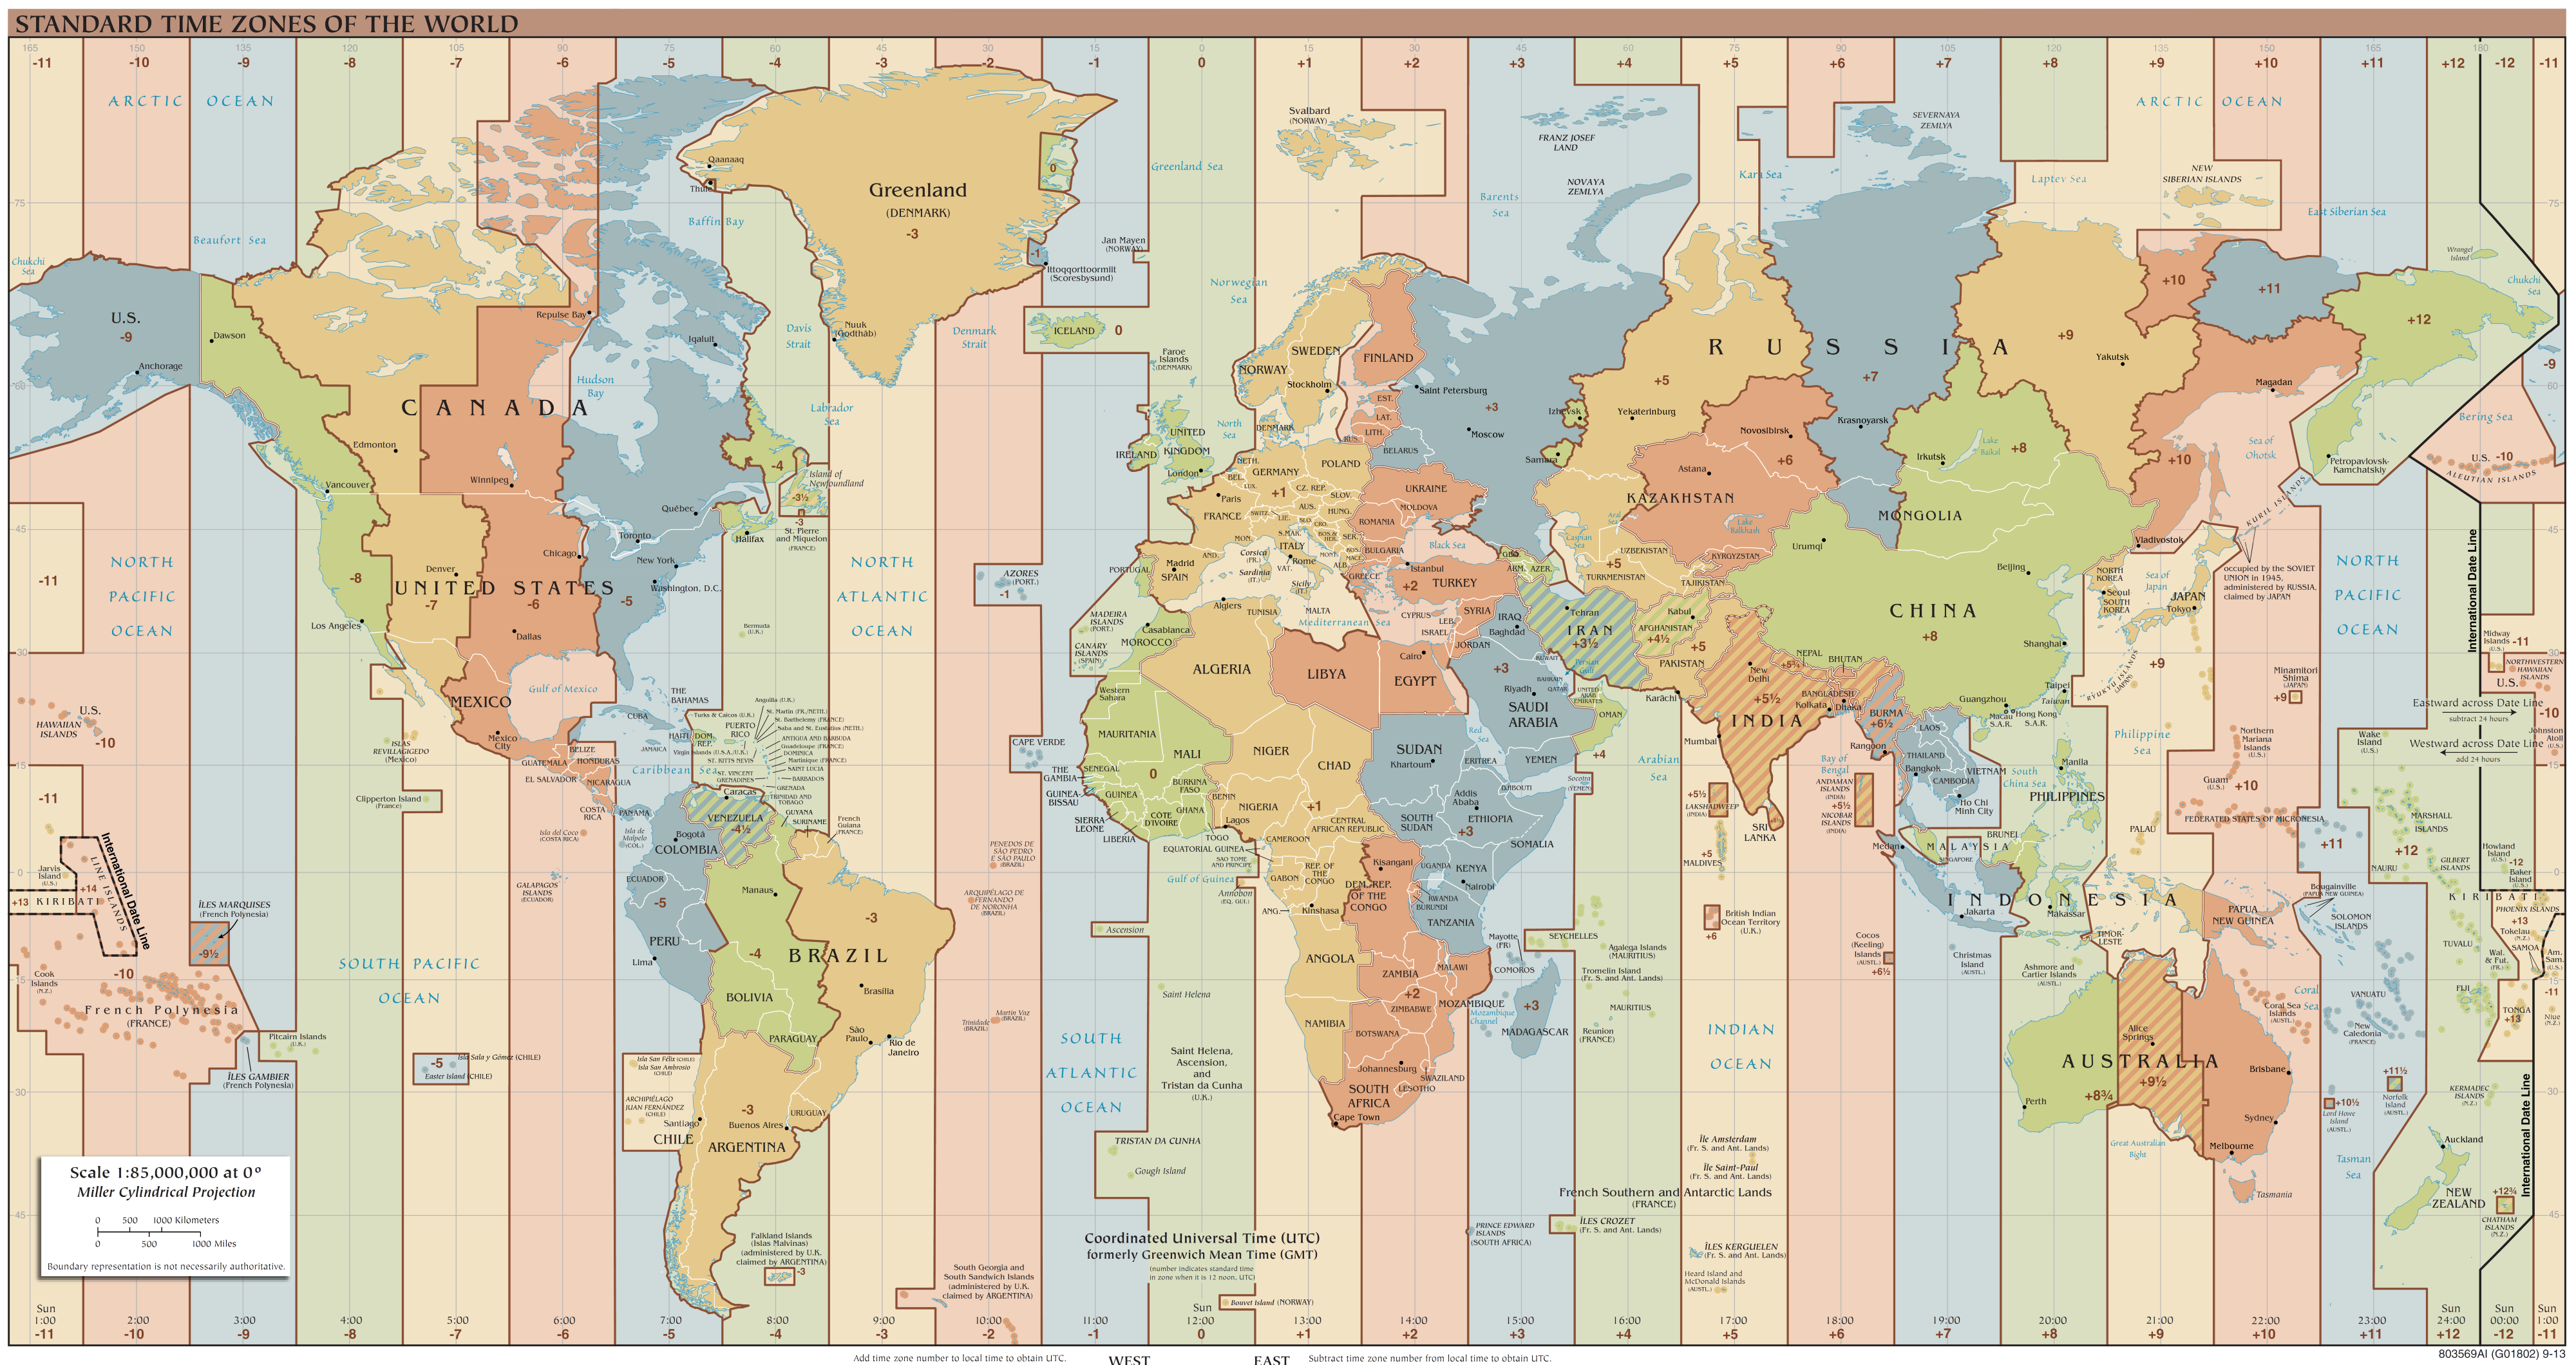 World Time Zones 2.png